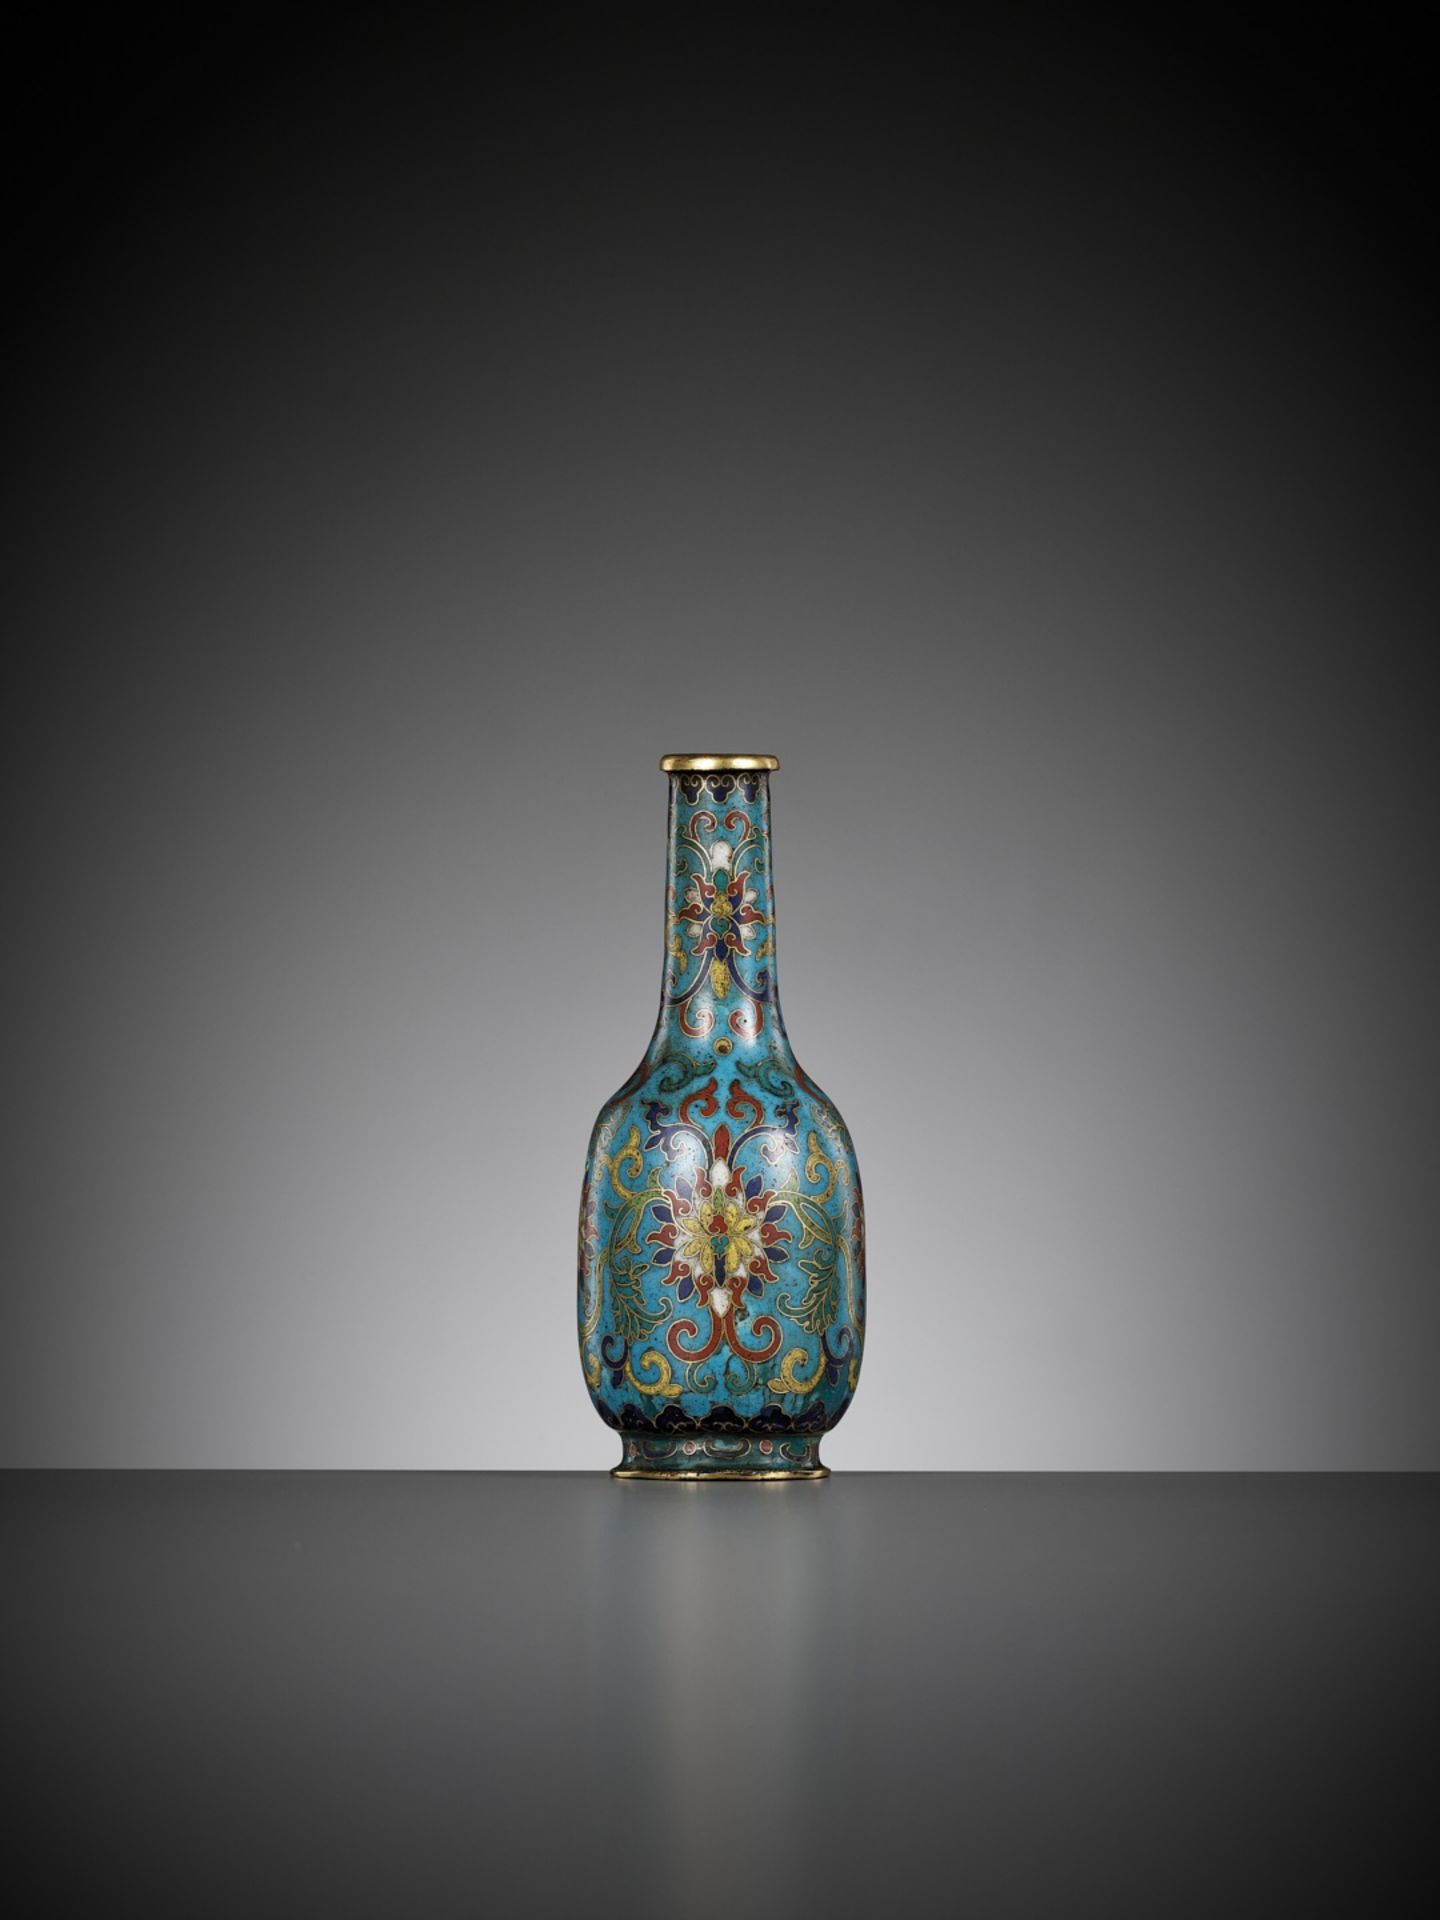 A CLOISONNE ENAMEL MALLET VASE, QIANLONG FIVE-CHARACTER MARK AND OF THE PERIOD - Image 10 of 14